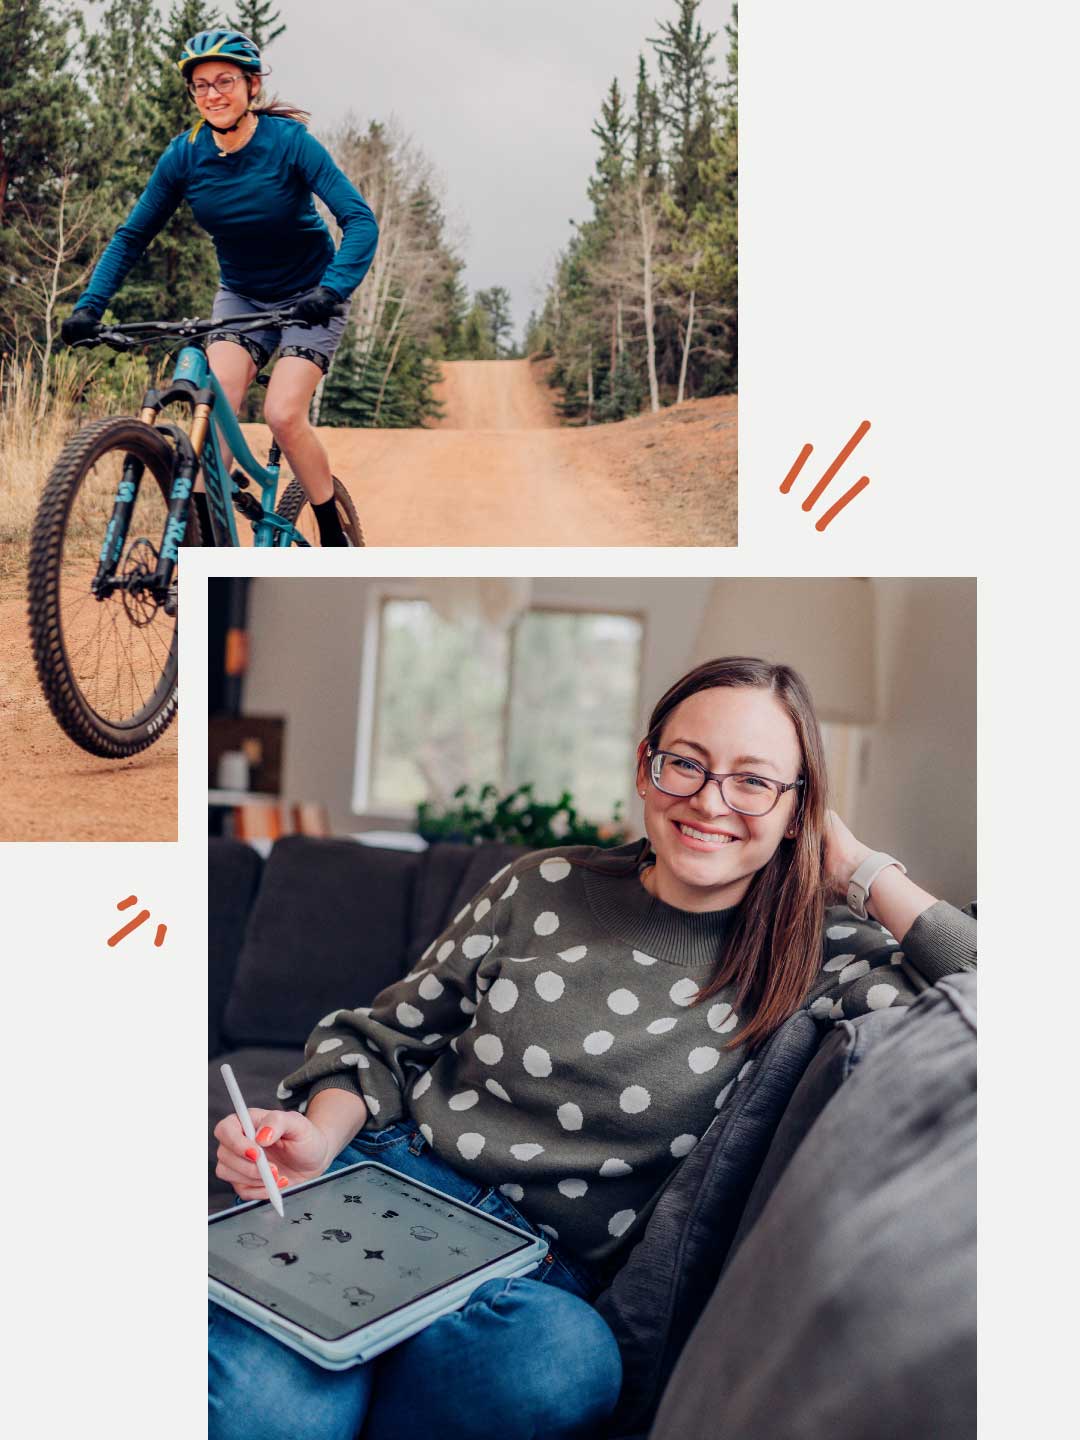 A two-photo collage shows Jacquelyn riding a mountain bike on a dirt road, and smiling at the camera while working on some logos with a stylus on her iPad.